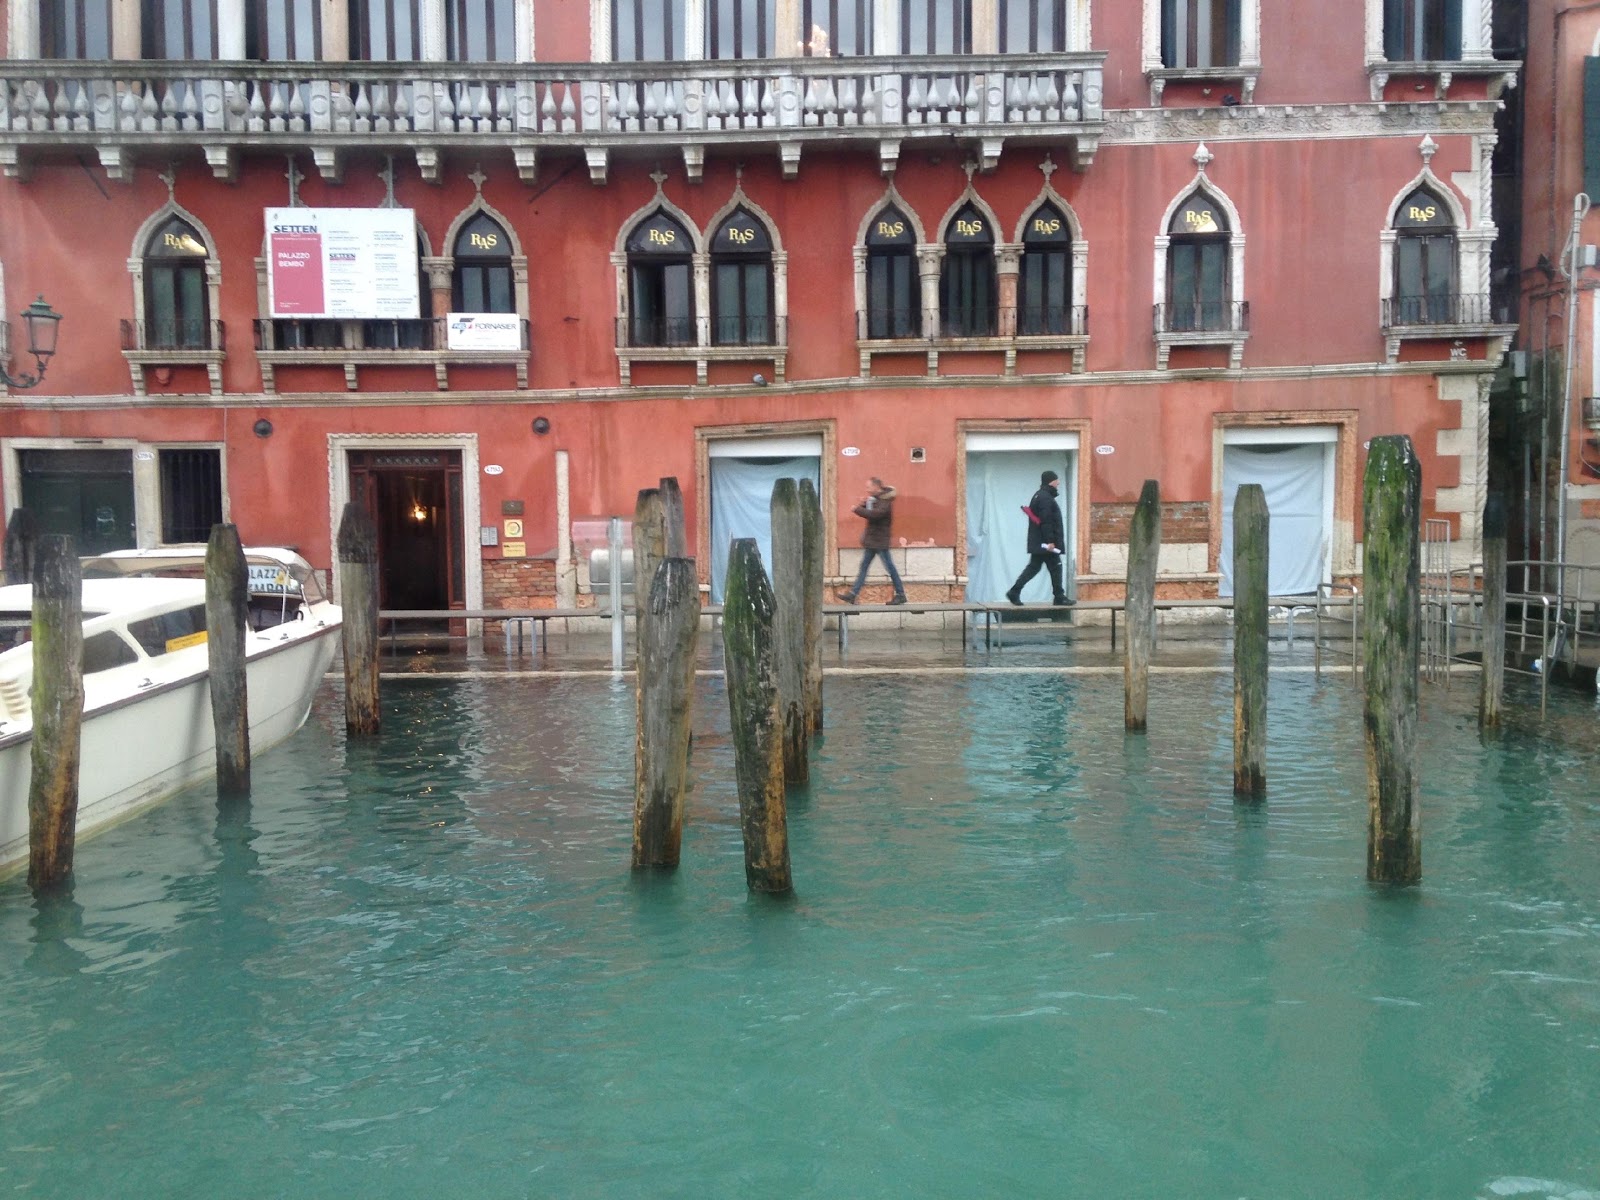 High Tide in Venice; Tables set up so people can walk